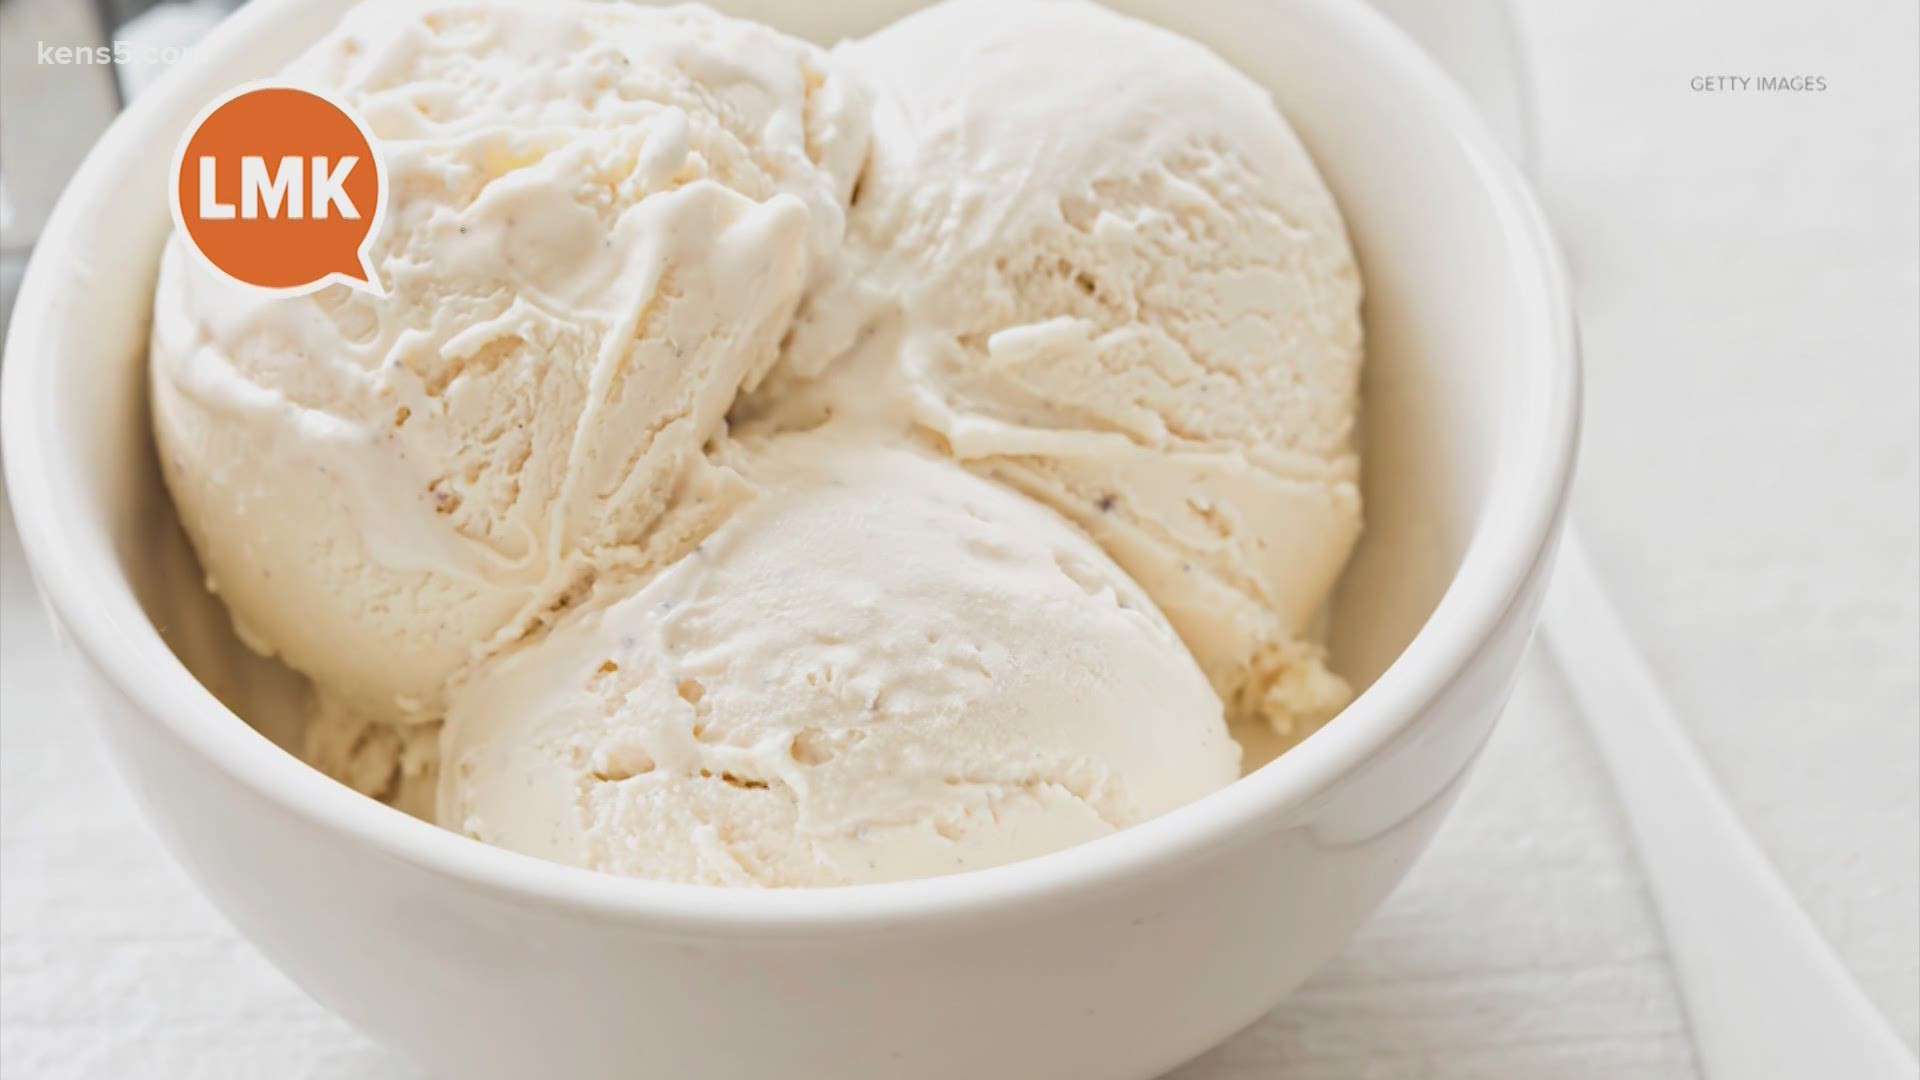 Häagen-Dazs claims there's nothing more comforting in the craziness of 2020 than a scoop of good, old-fashioned vanilla ice cream.